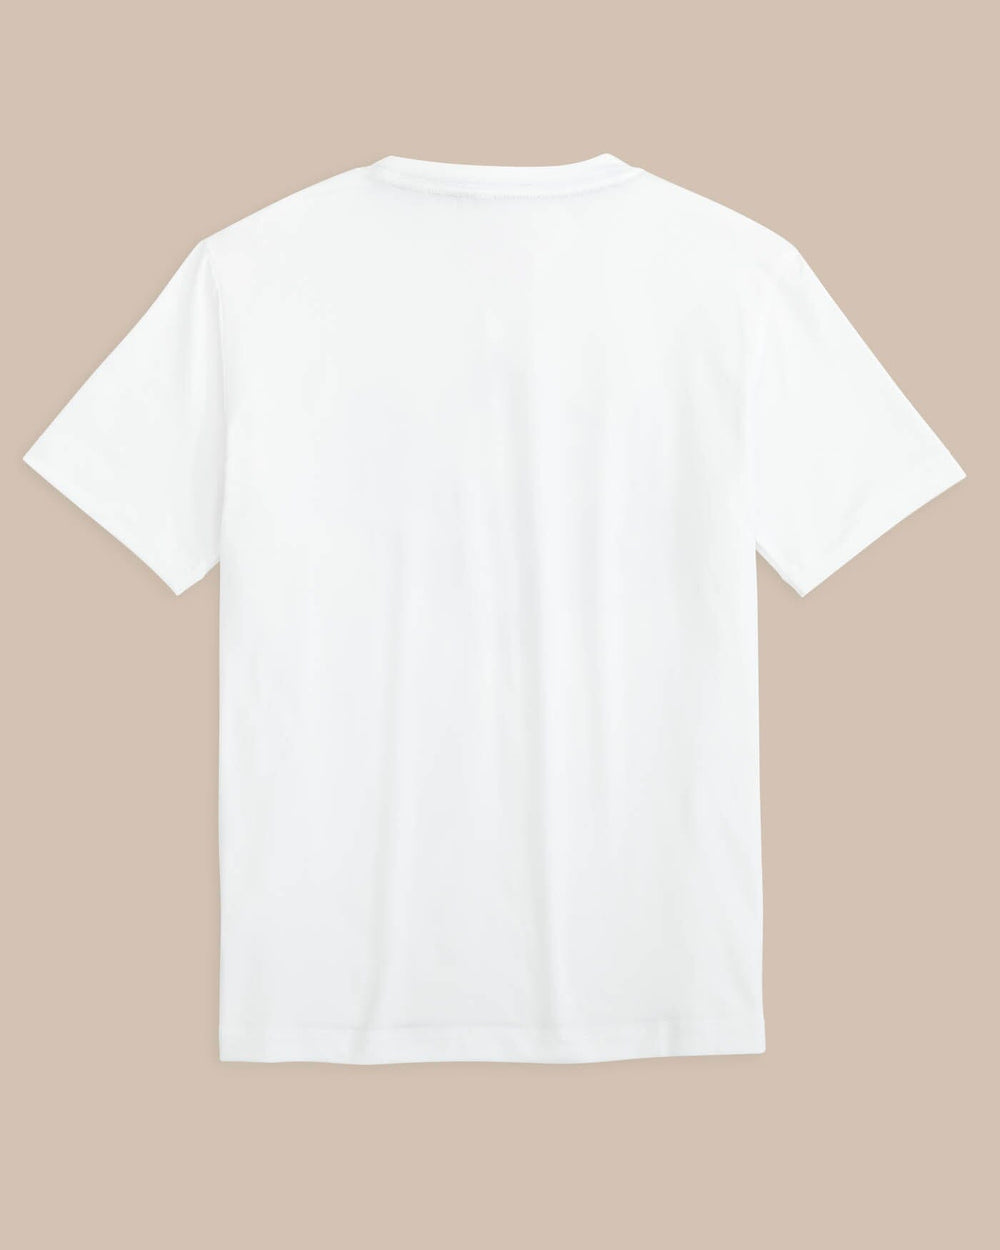 The back view of the Southern Tide Kids Skipjacks Performance Short Sleeve T-Shirt by Southern Tide - Classic White